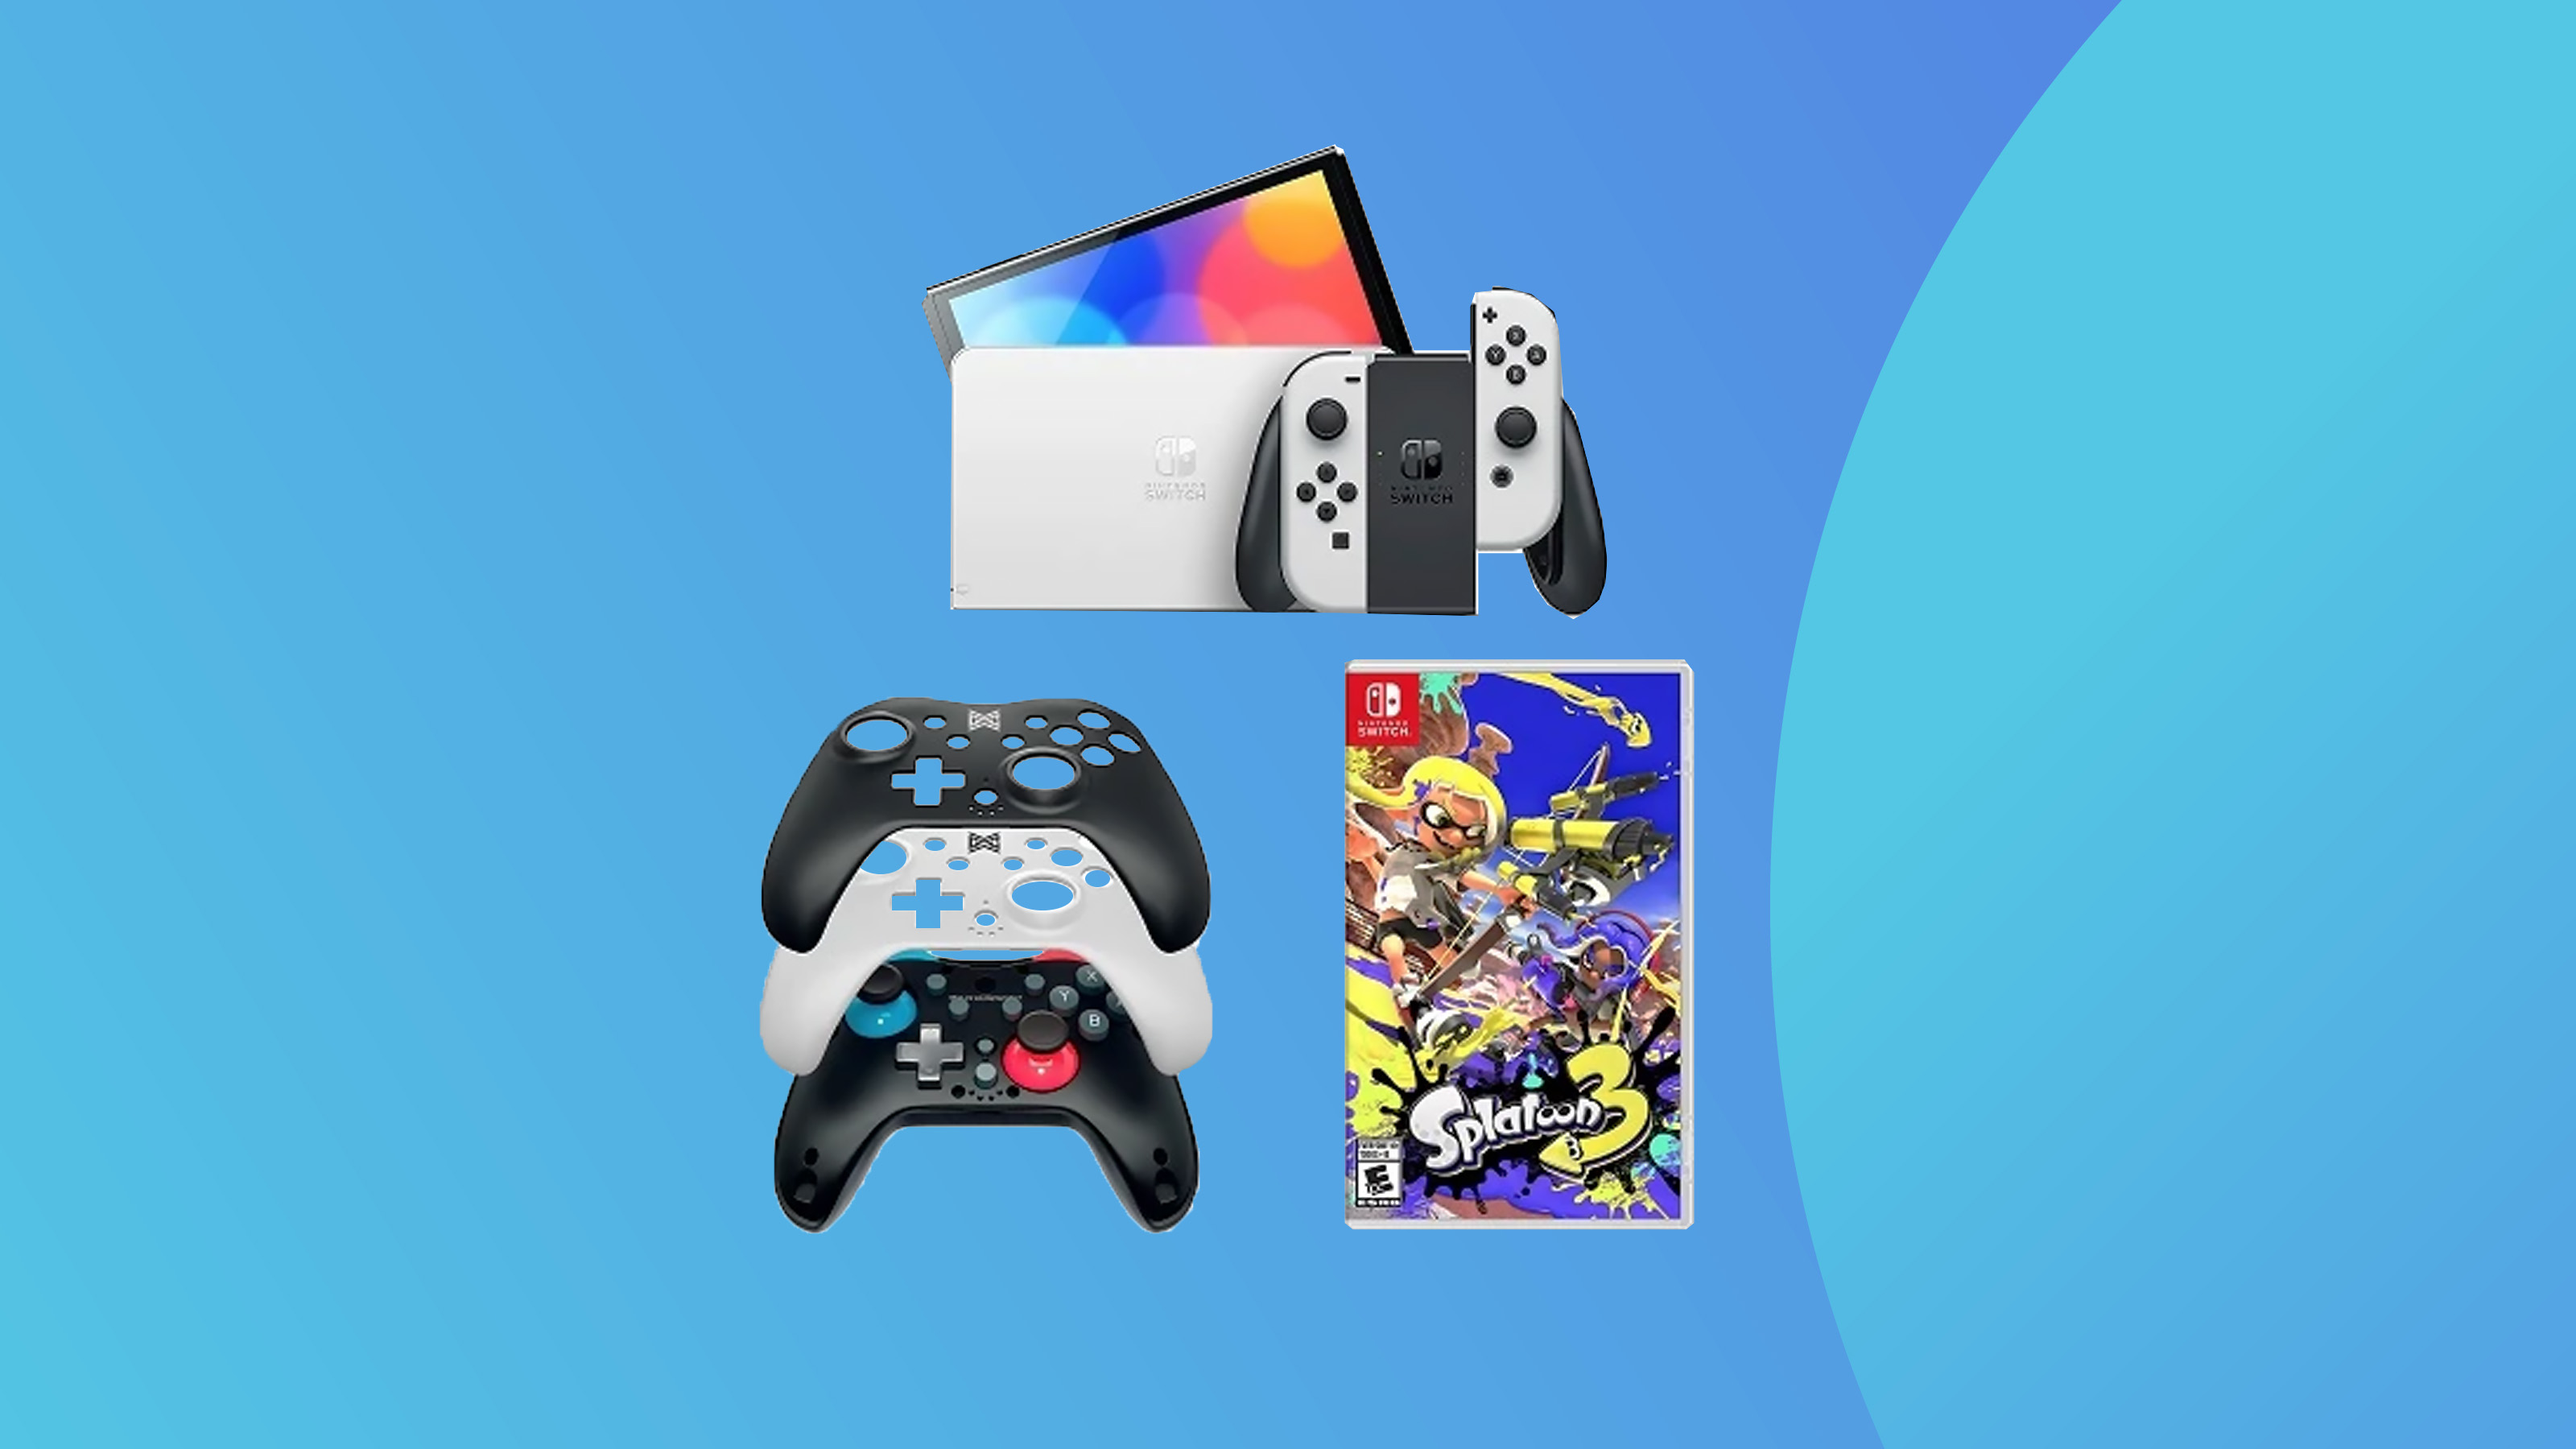 A shot of the Switch Oled product and accessories against a colored background